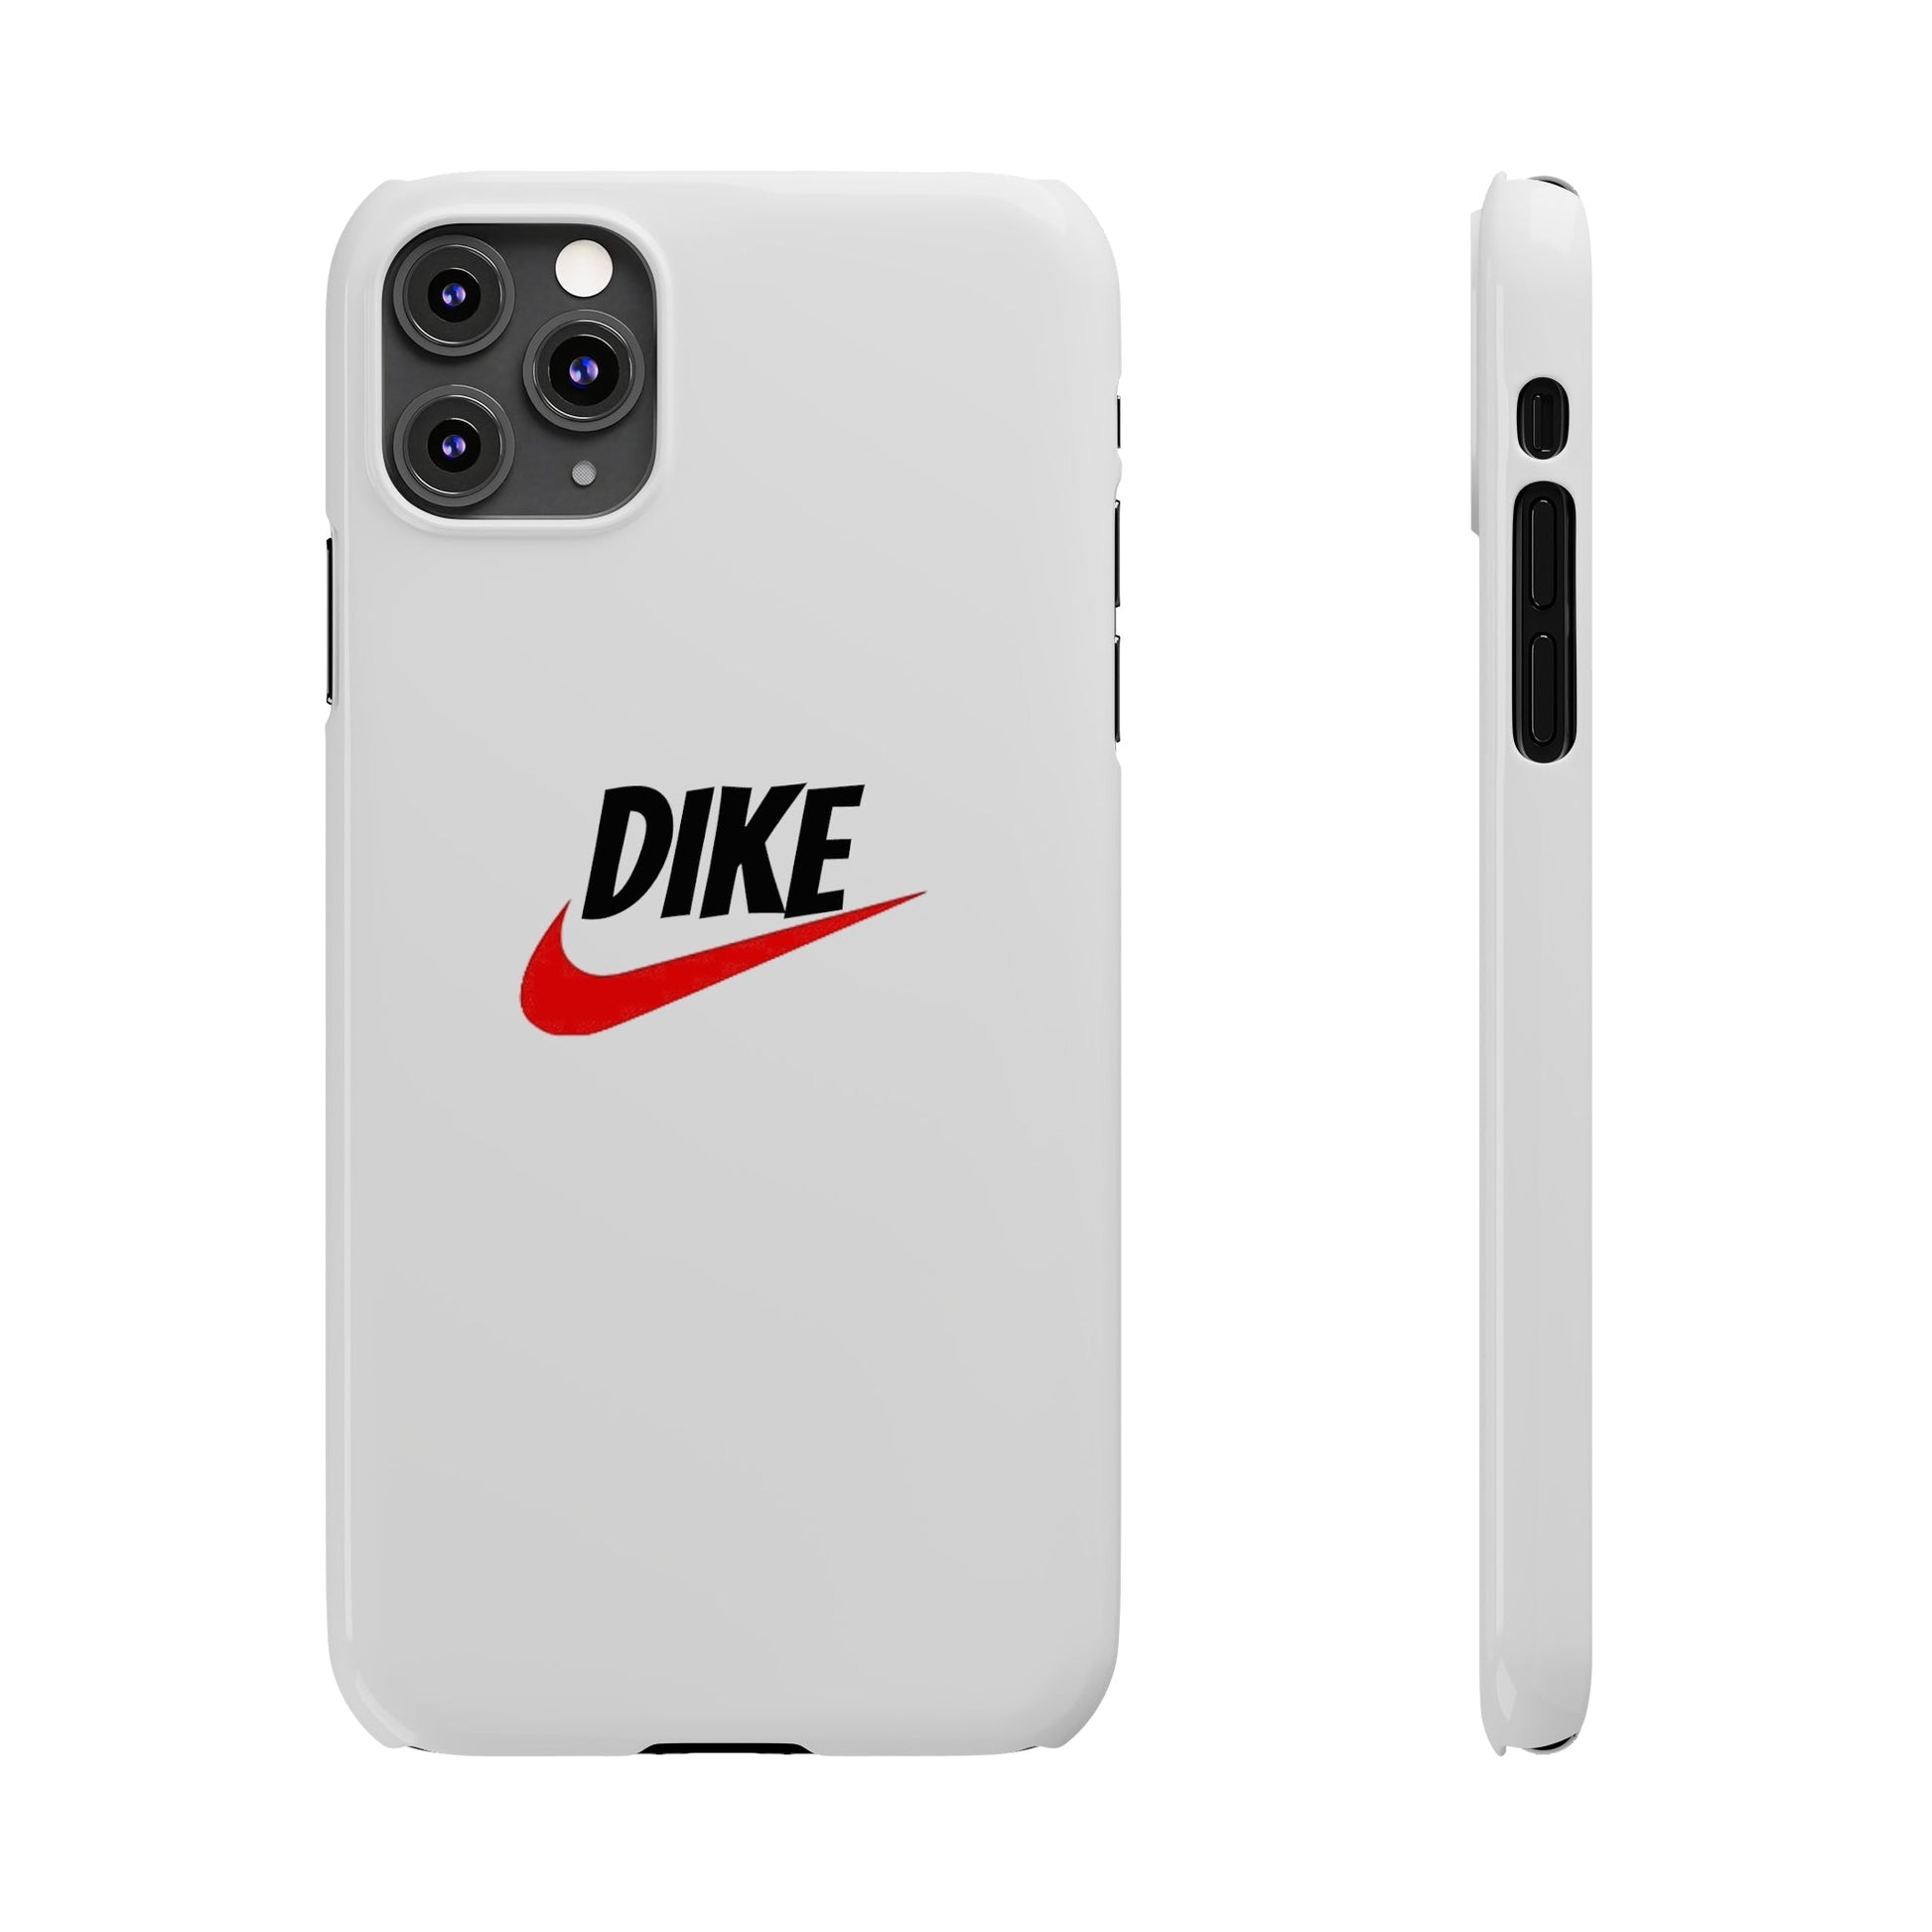 "Dike" MagStrong Phone Cases iPhone 11 Pro Max